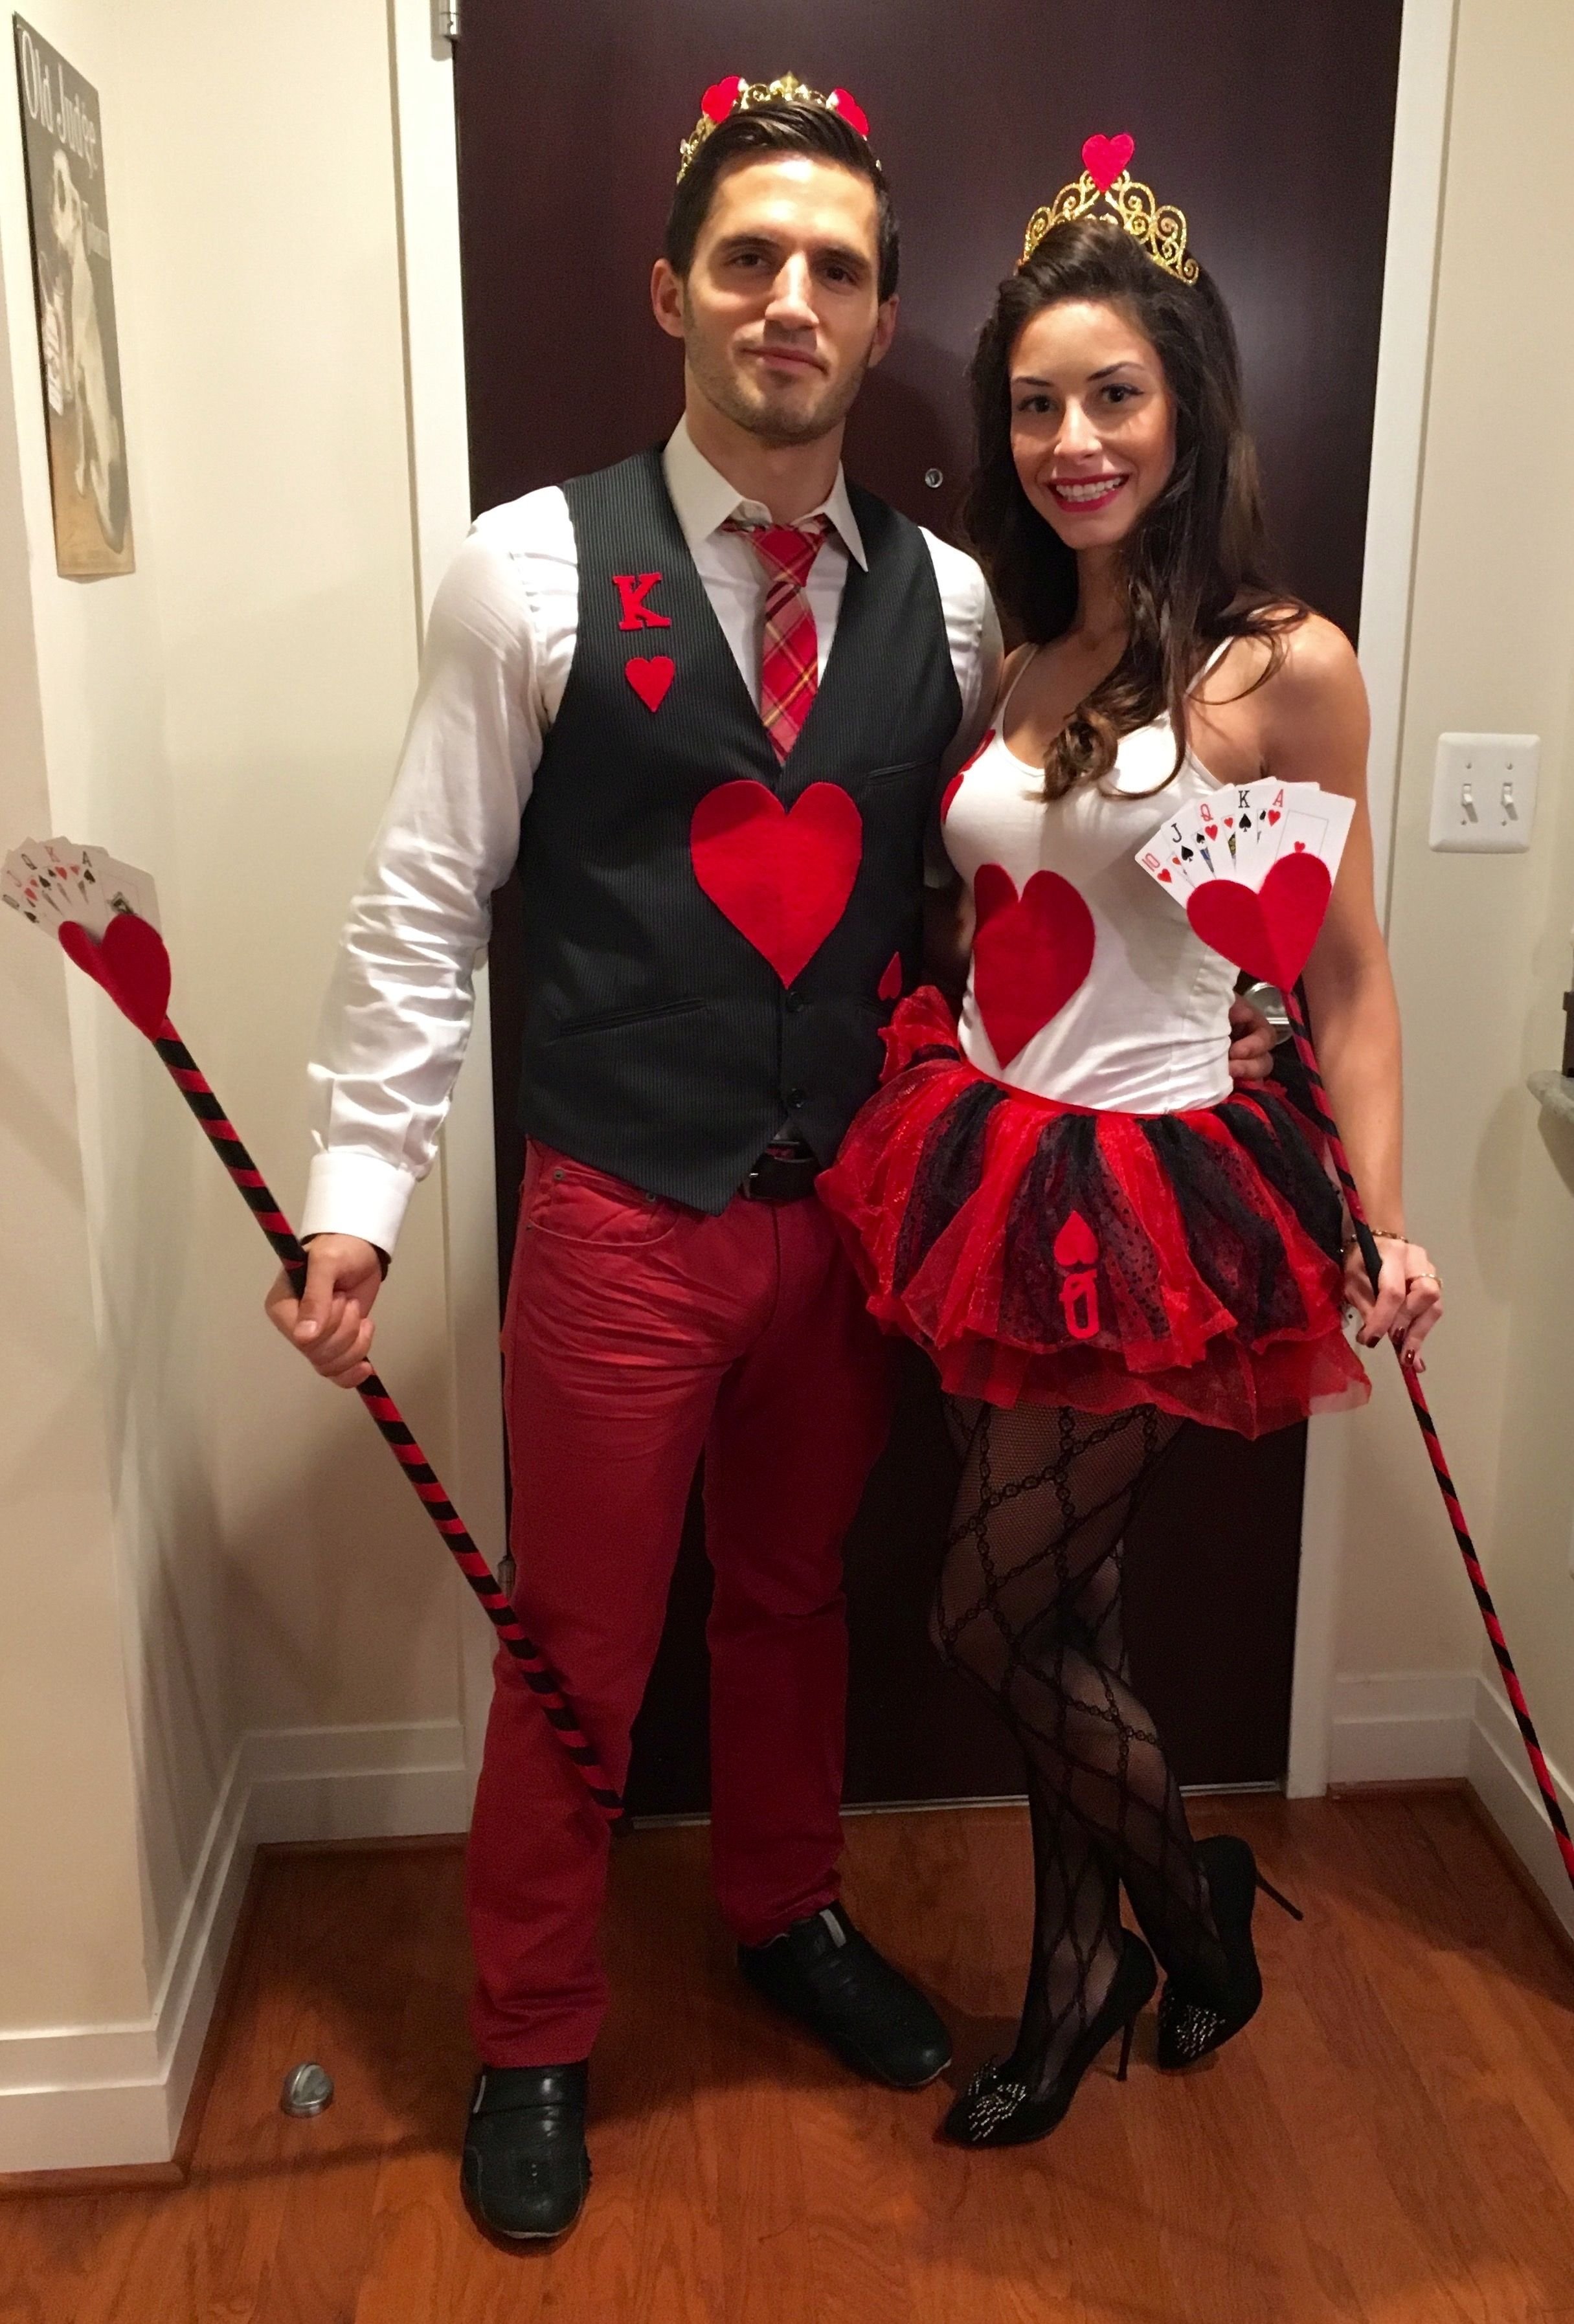 10 Most Clever Couple Halloween Costume Ideas 2020